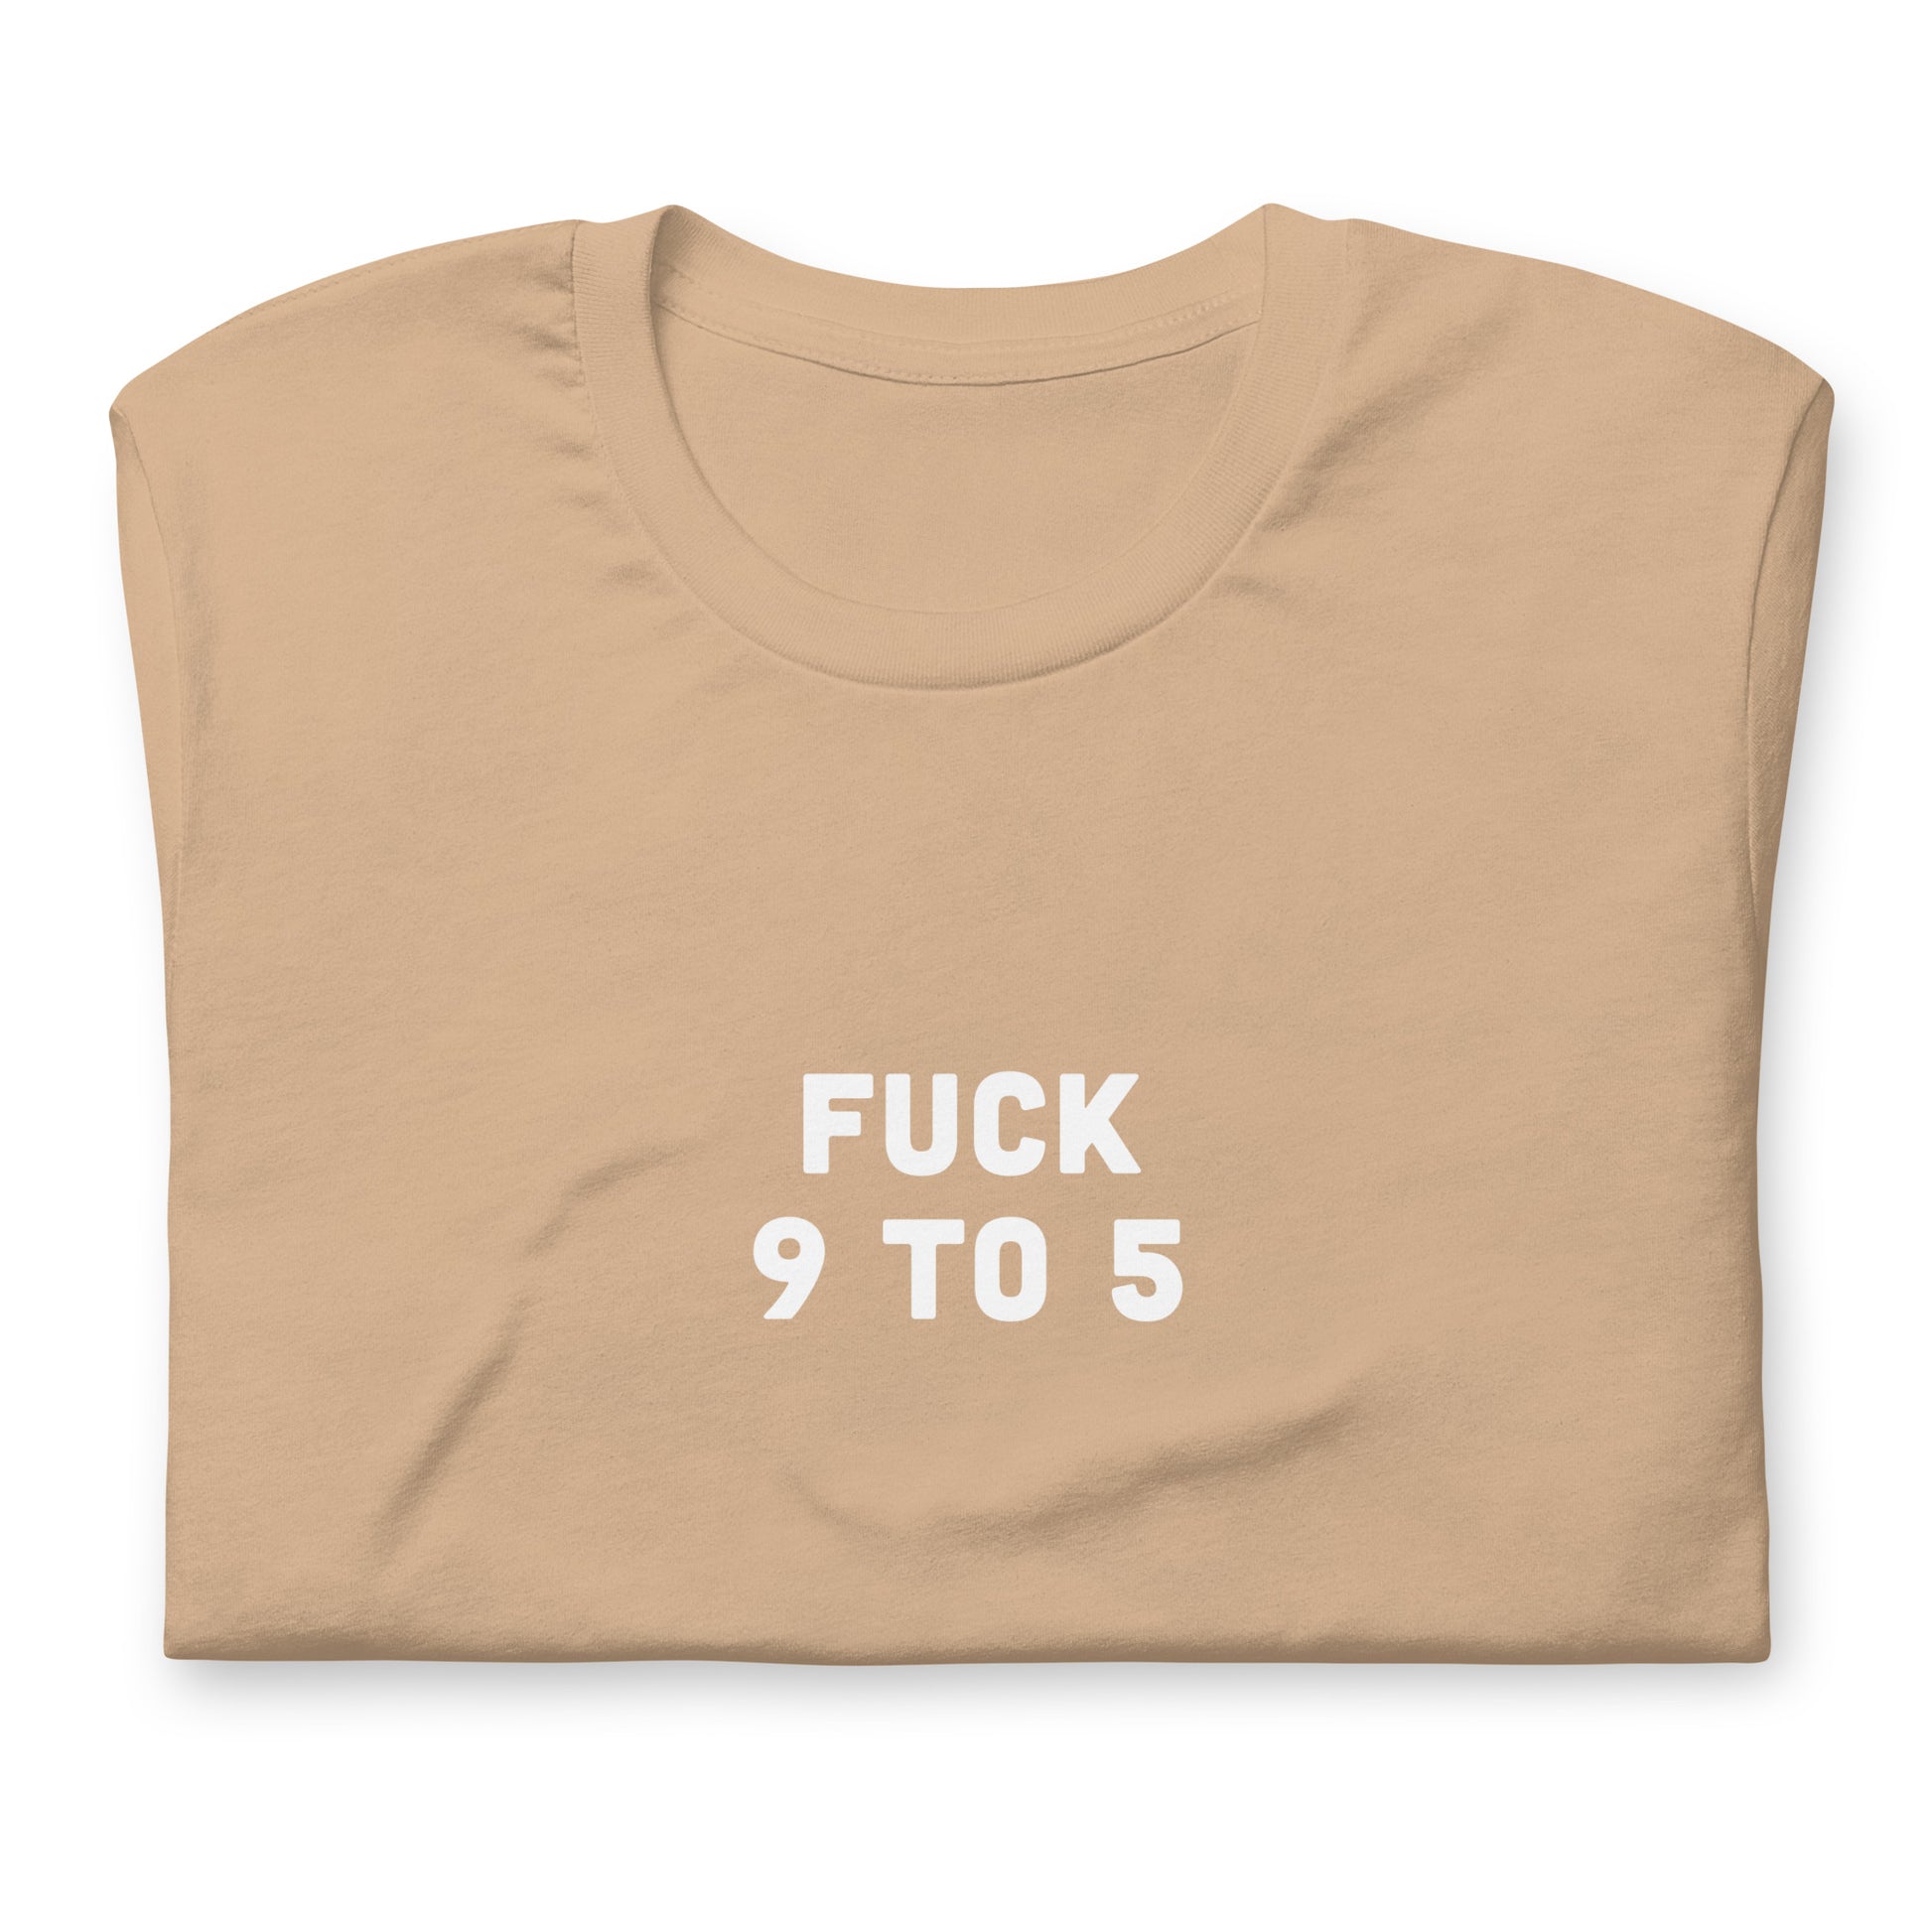 Fuck 9 To 5 T-Shirt Size XL Color Forest